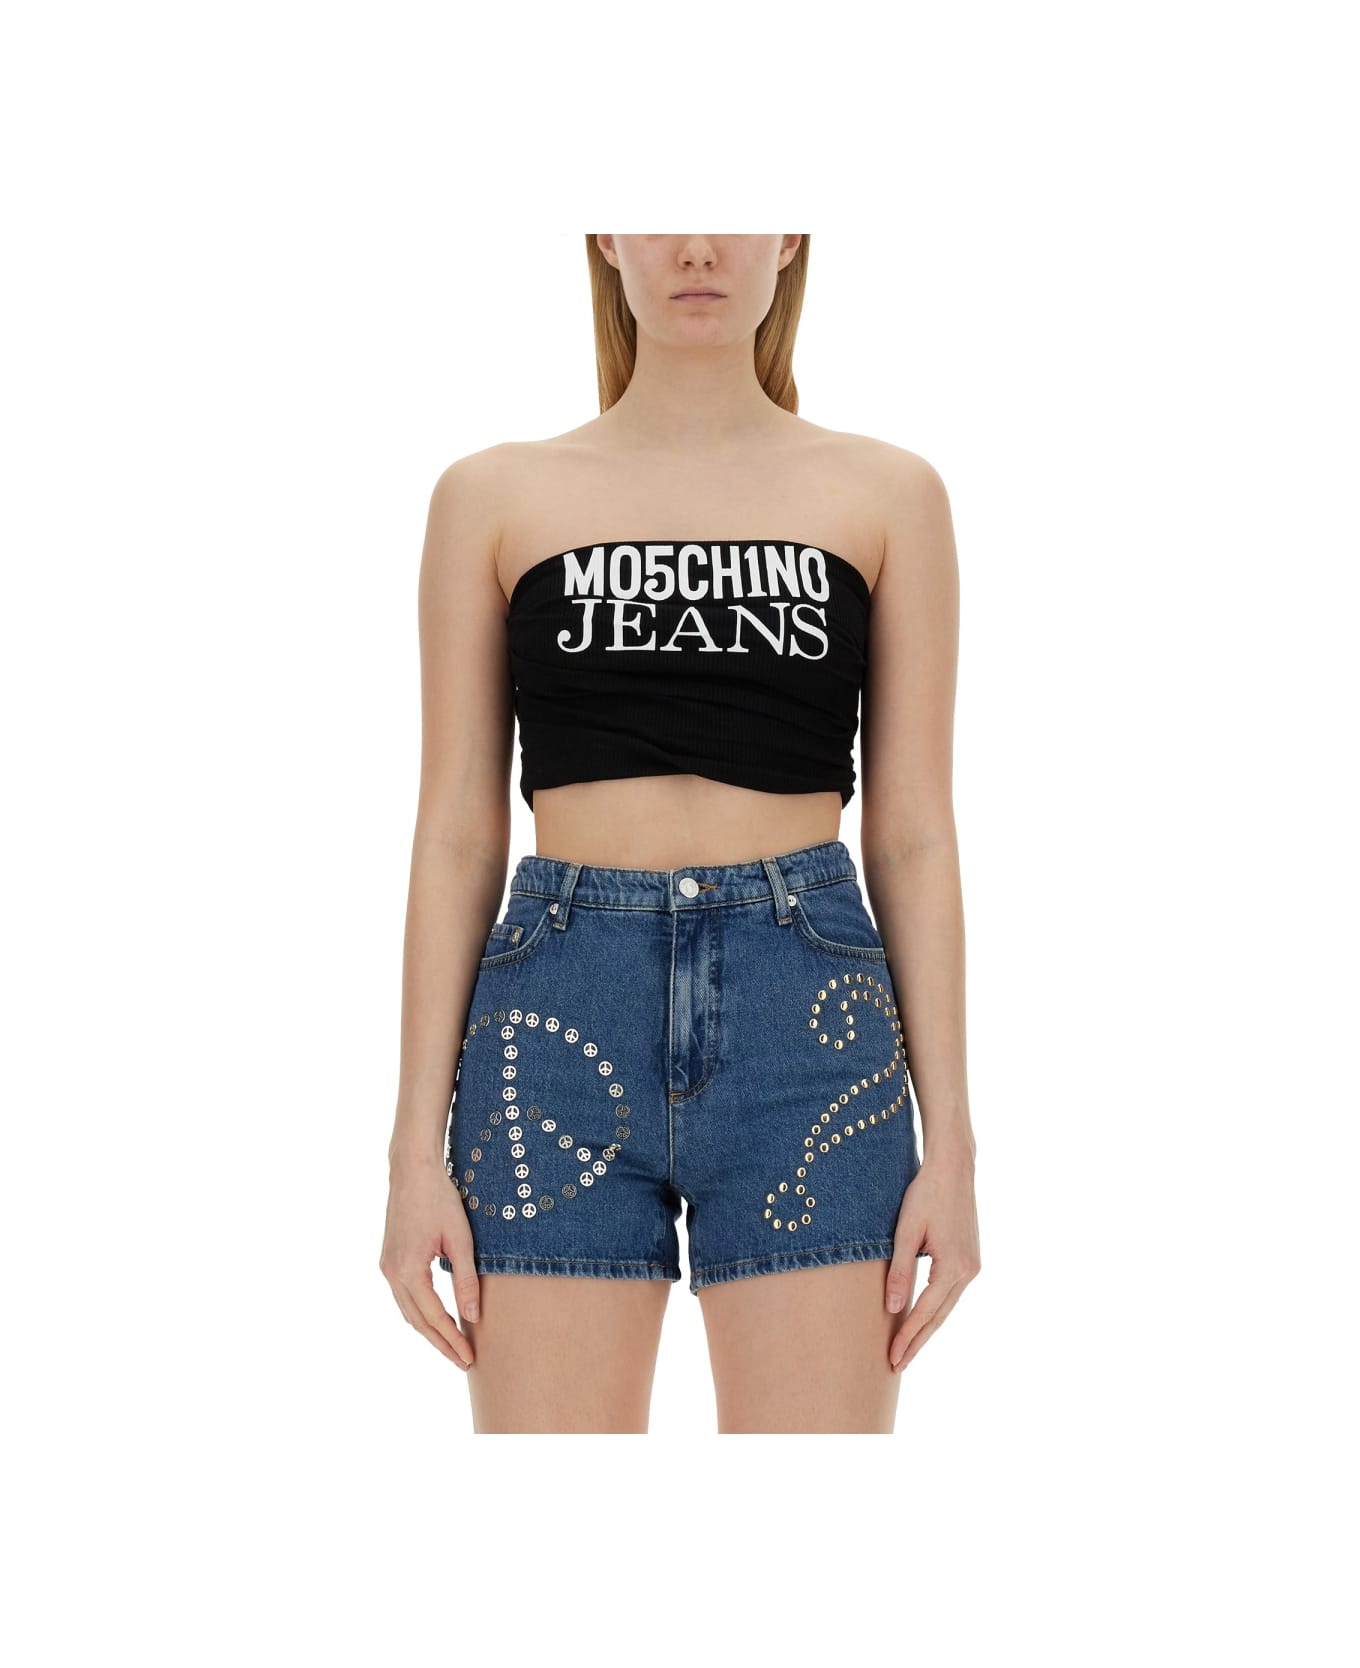 M05CH1N0 Jeans Tops With Logo - Black